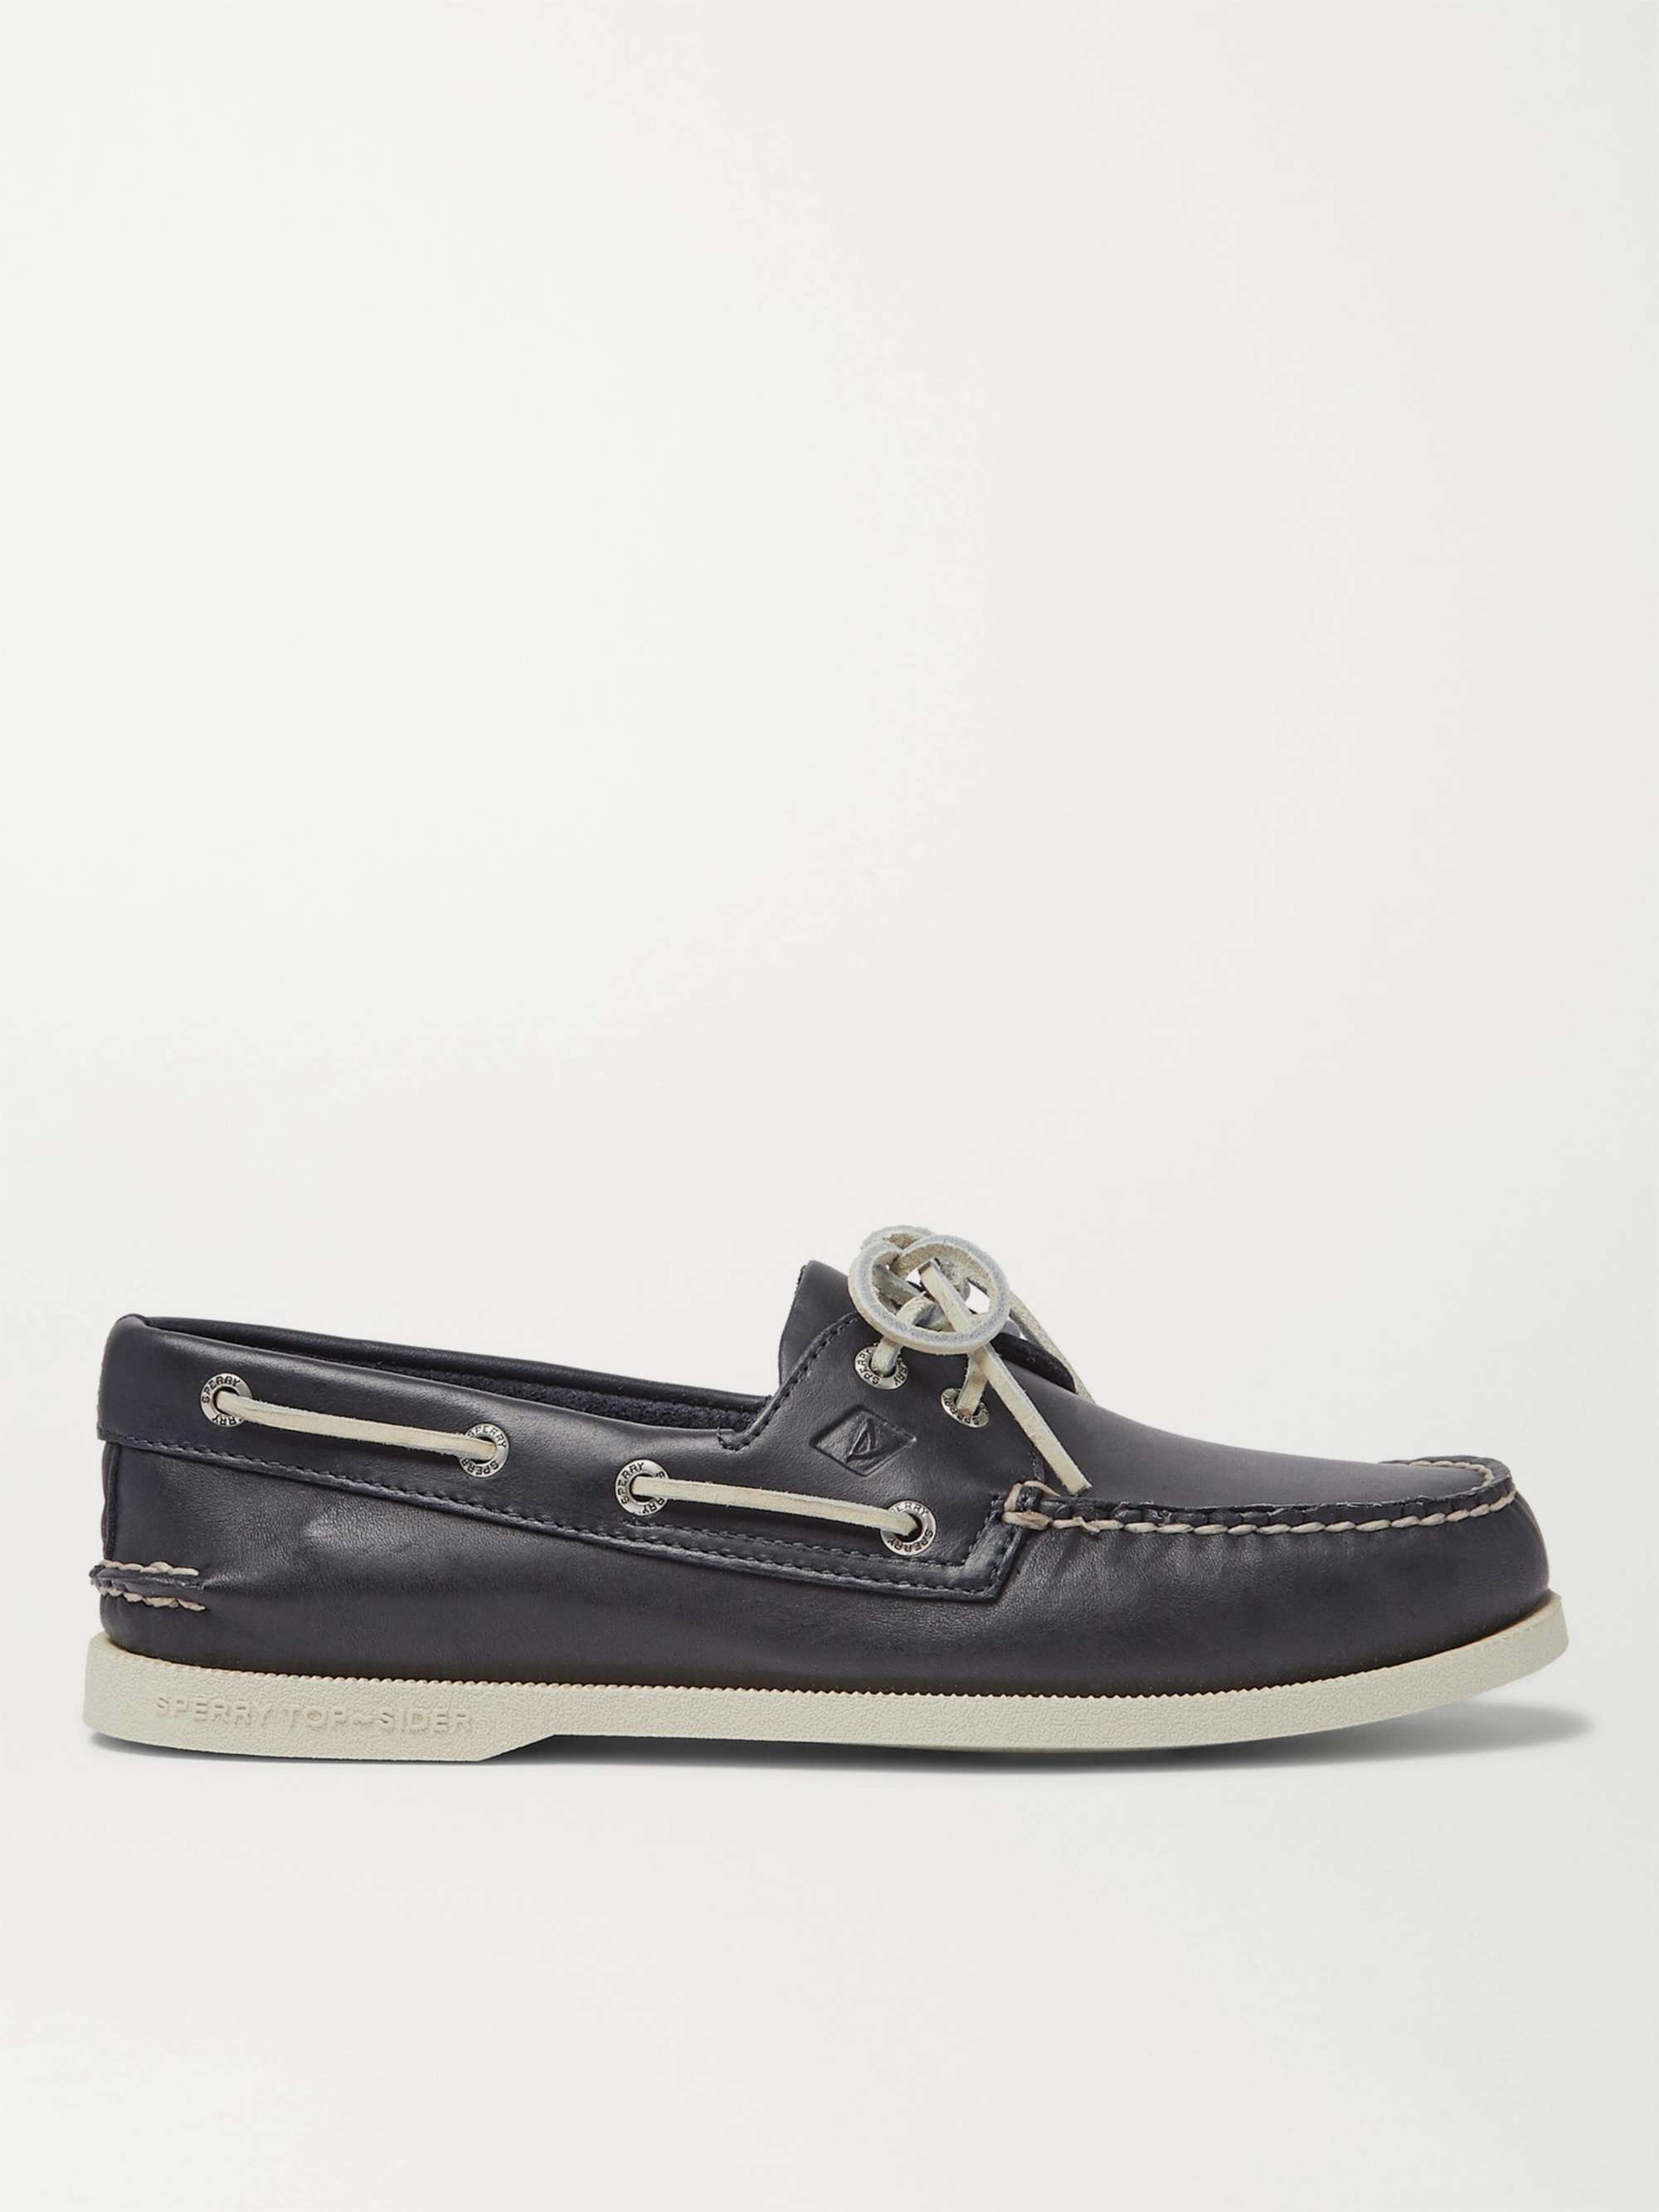 SPERRY Authentic Original Leather Boat Shoes